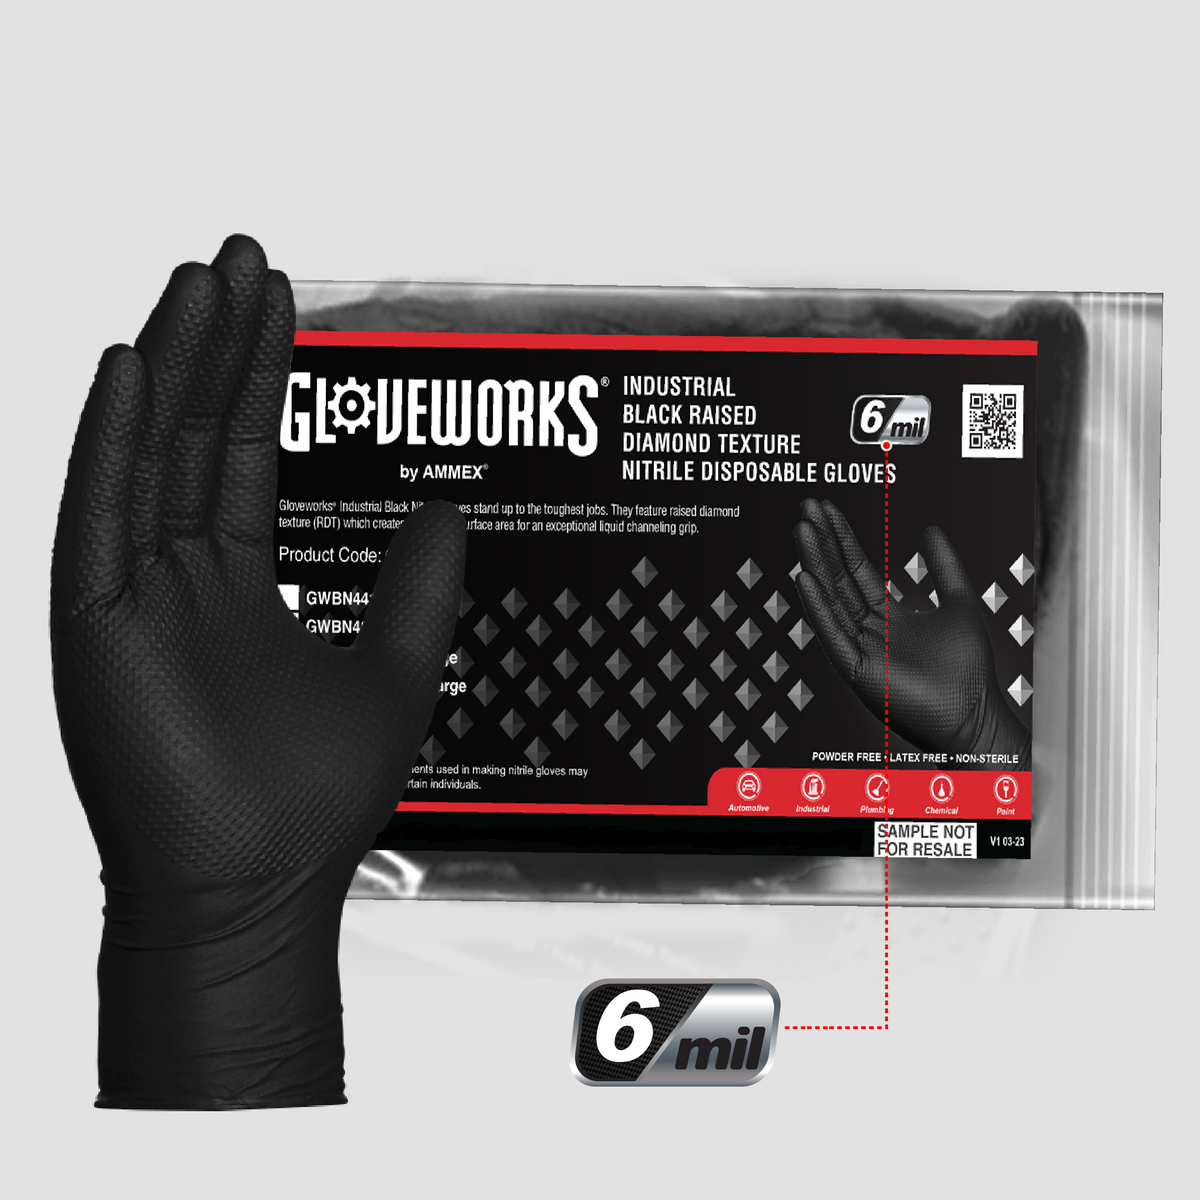 Gloveworks Nitrile With Raised Diamond Texture Gets a Lot of